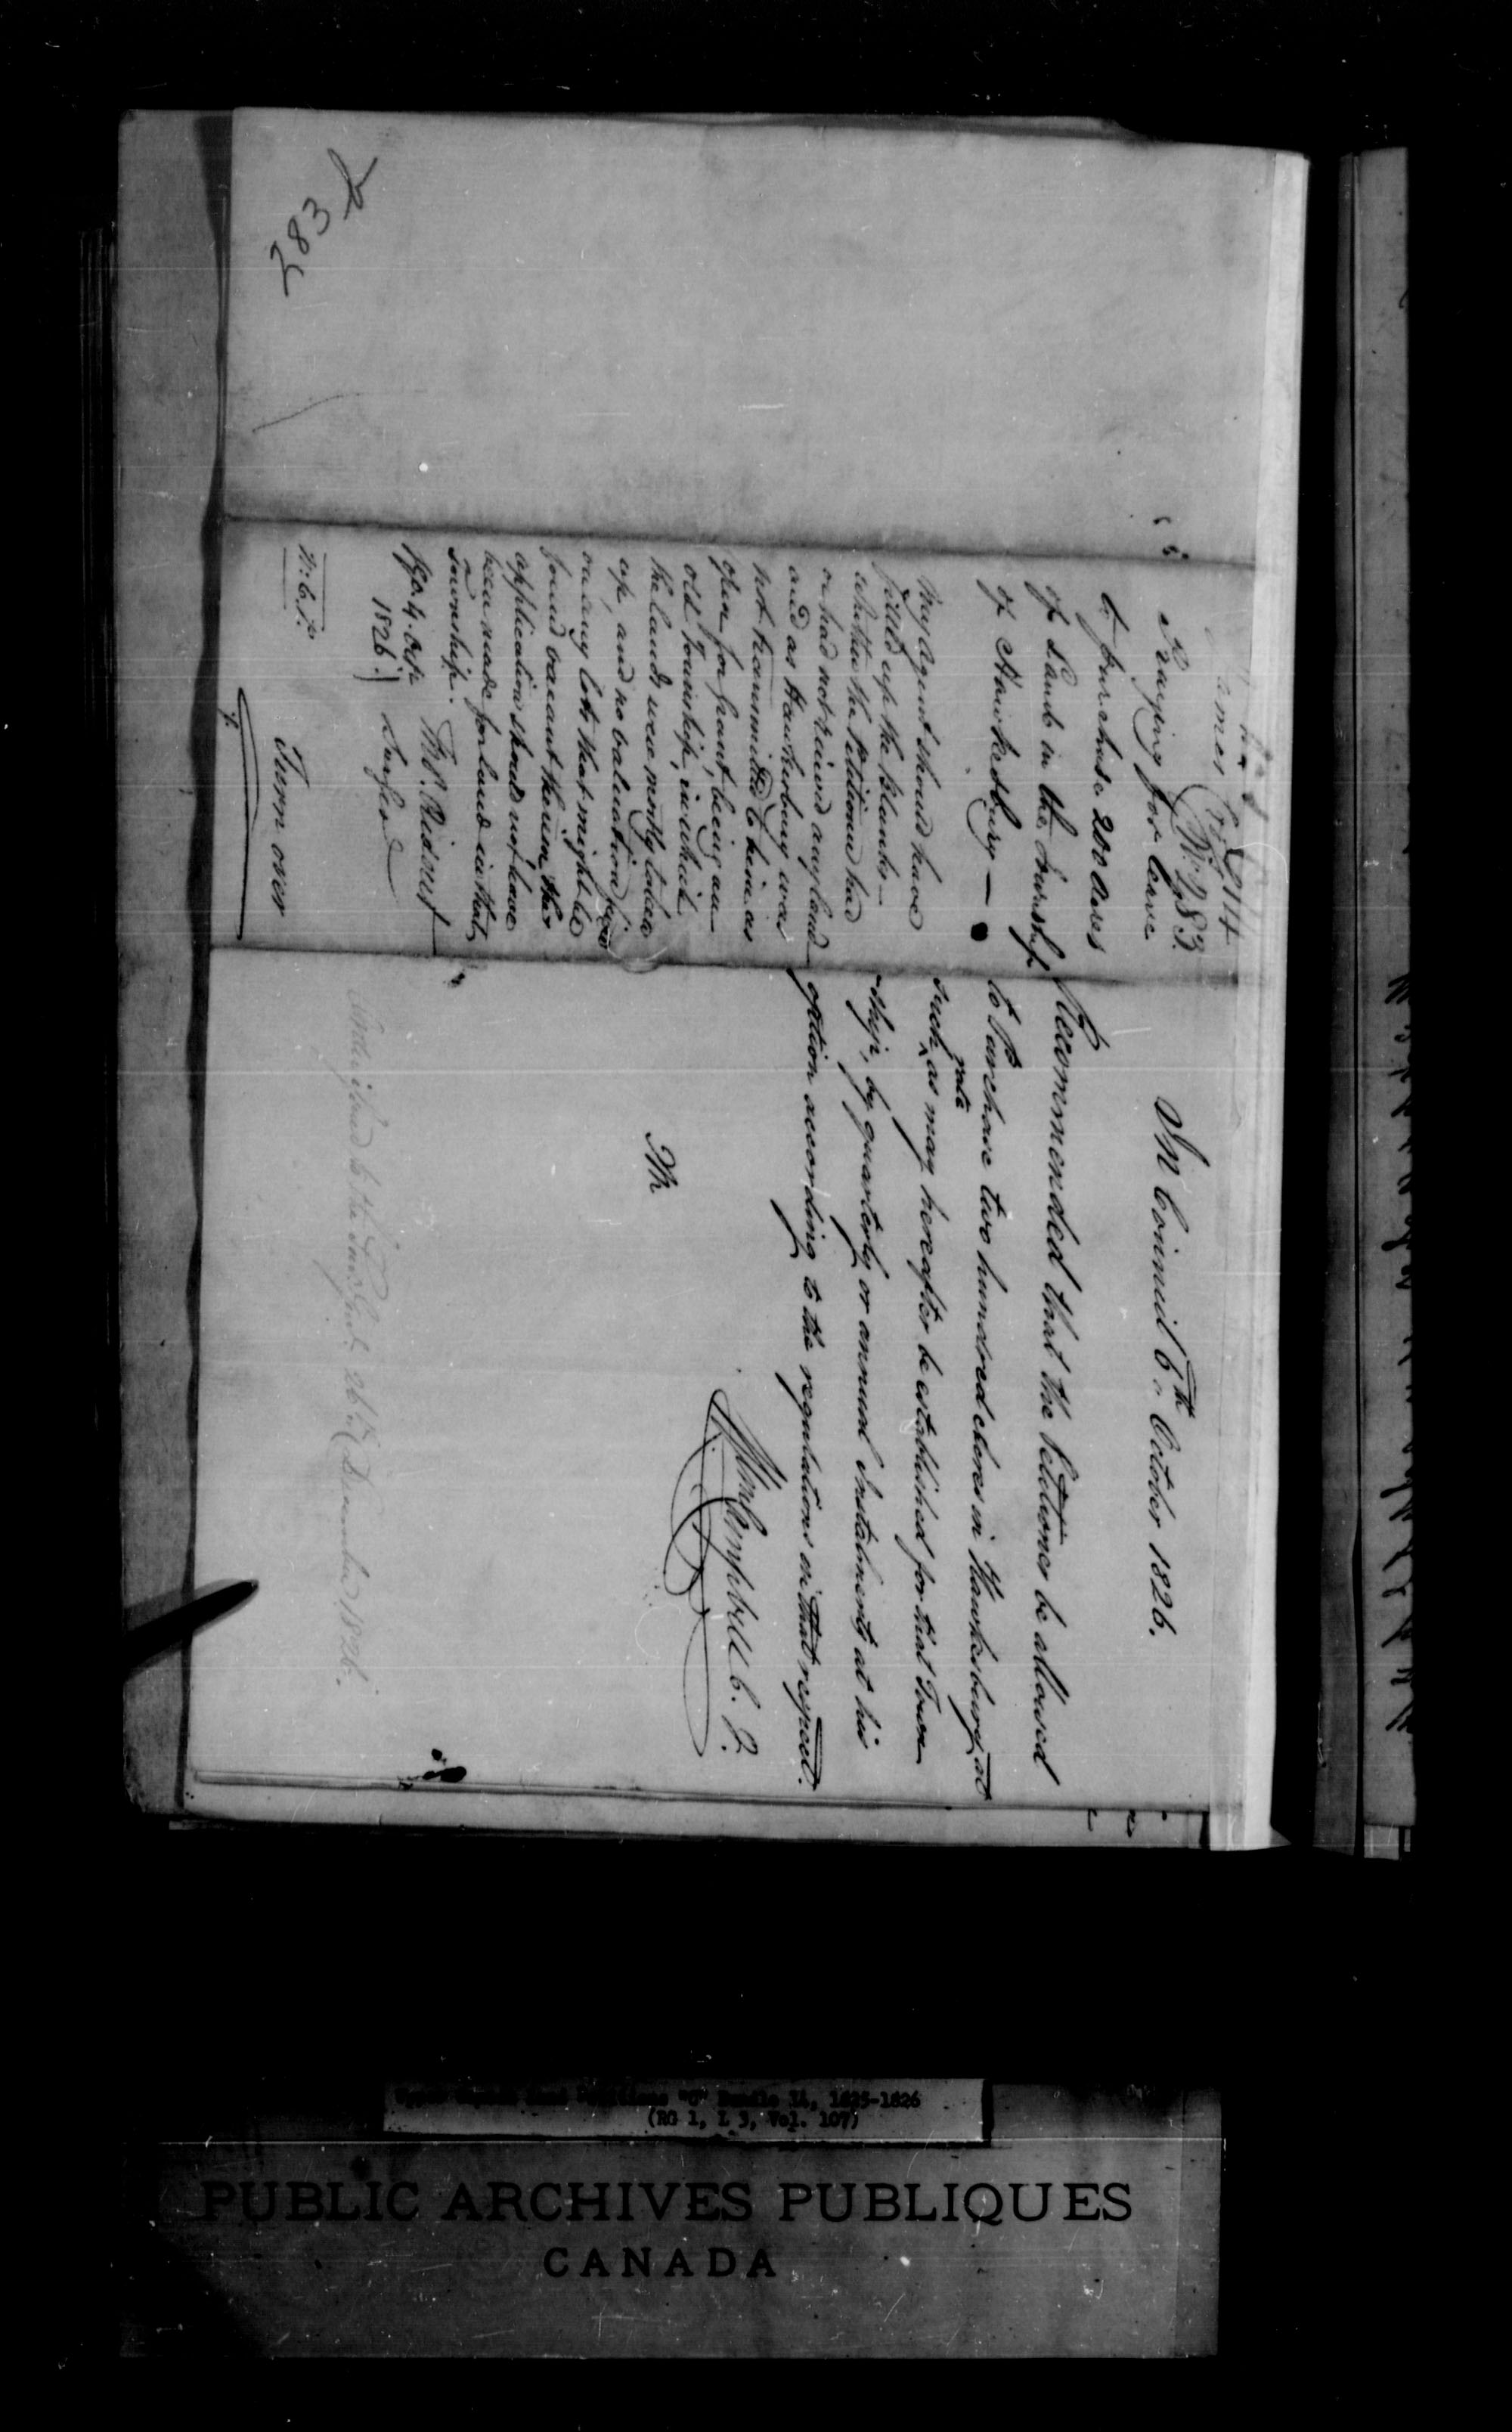 Title: Upper Canada Land Petitions (1763-1865) - Mikan Number: 205131 - Microform: c-1724